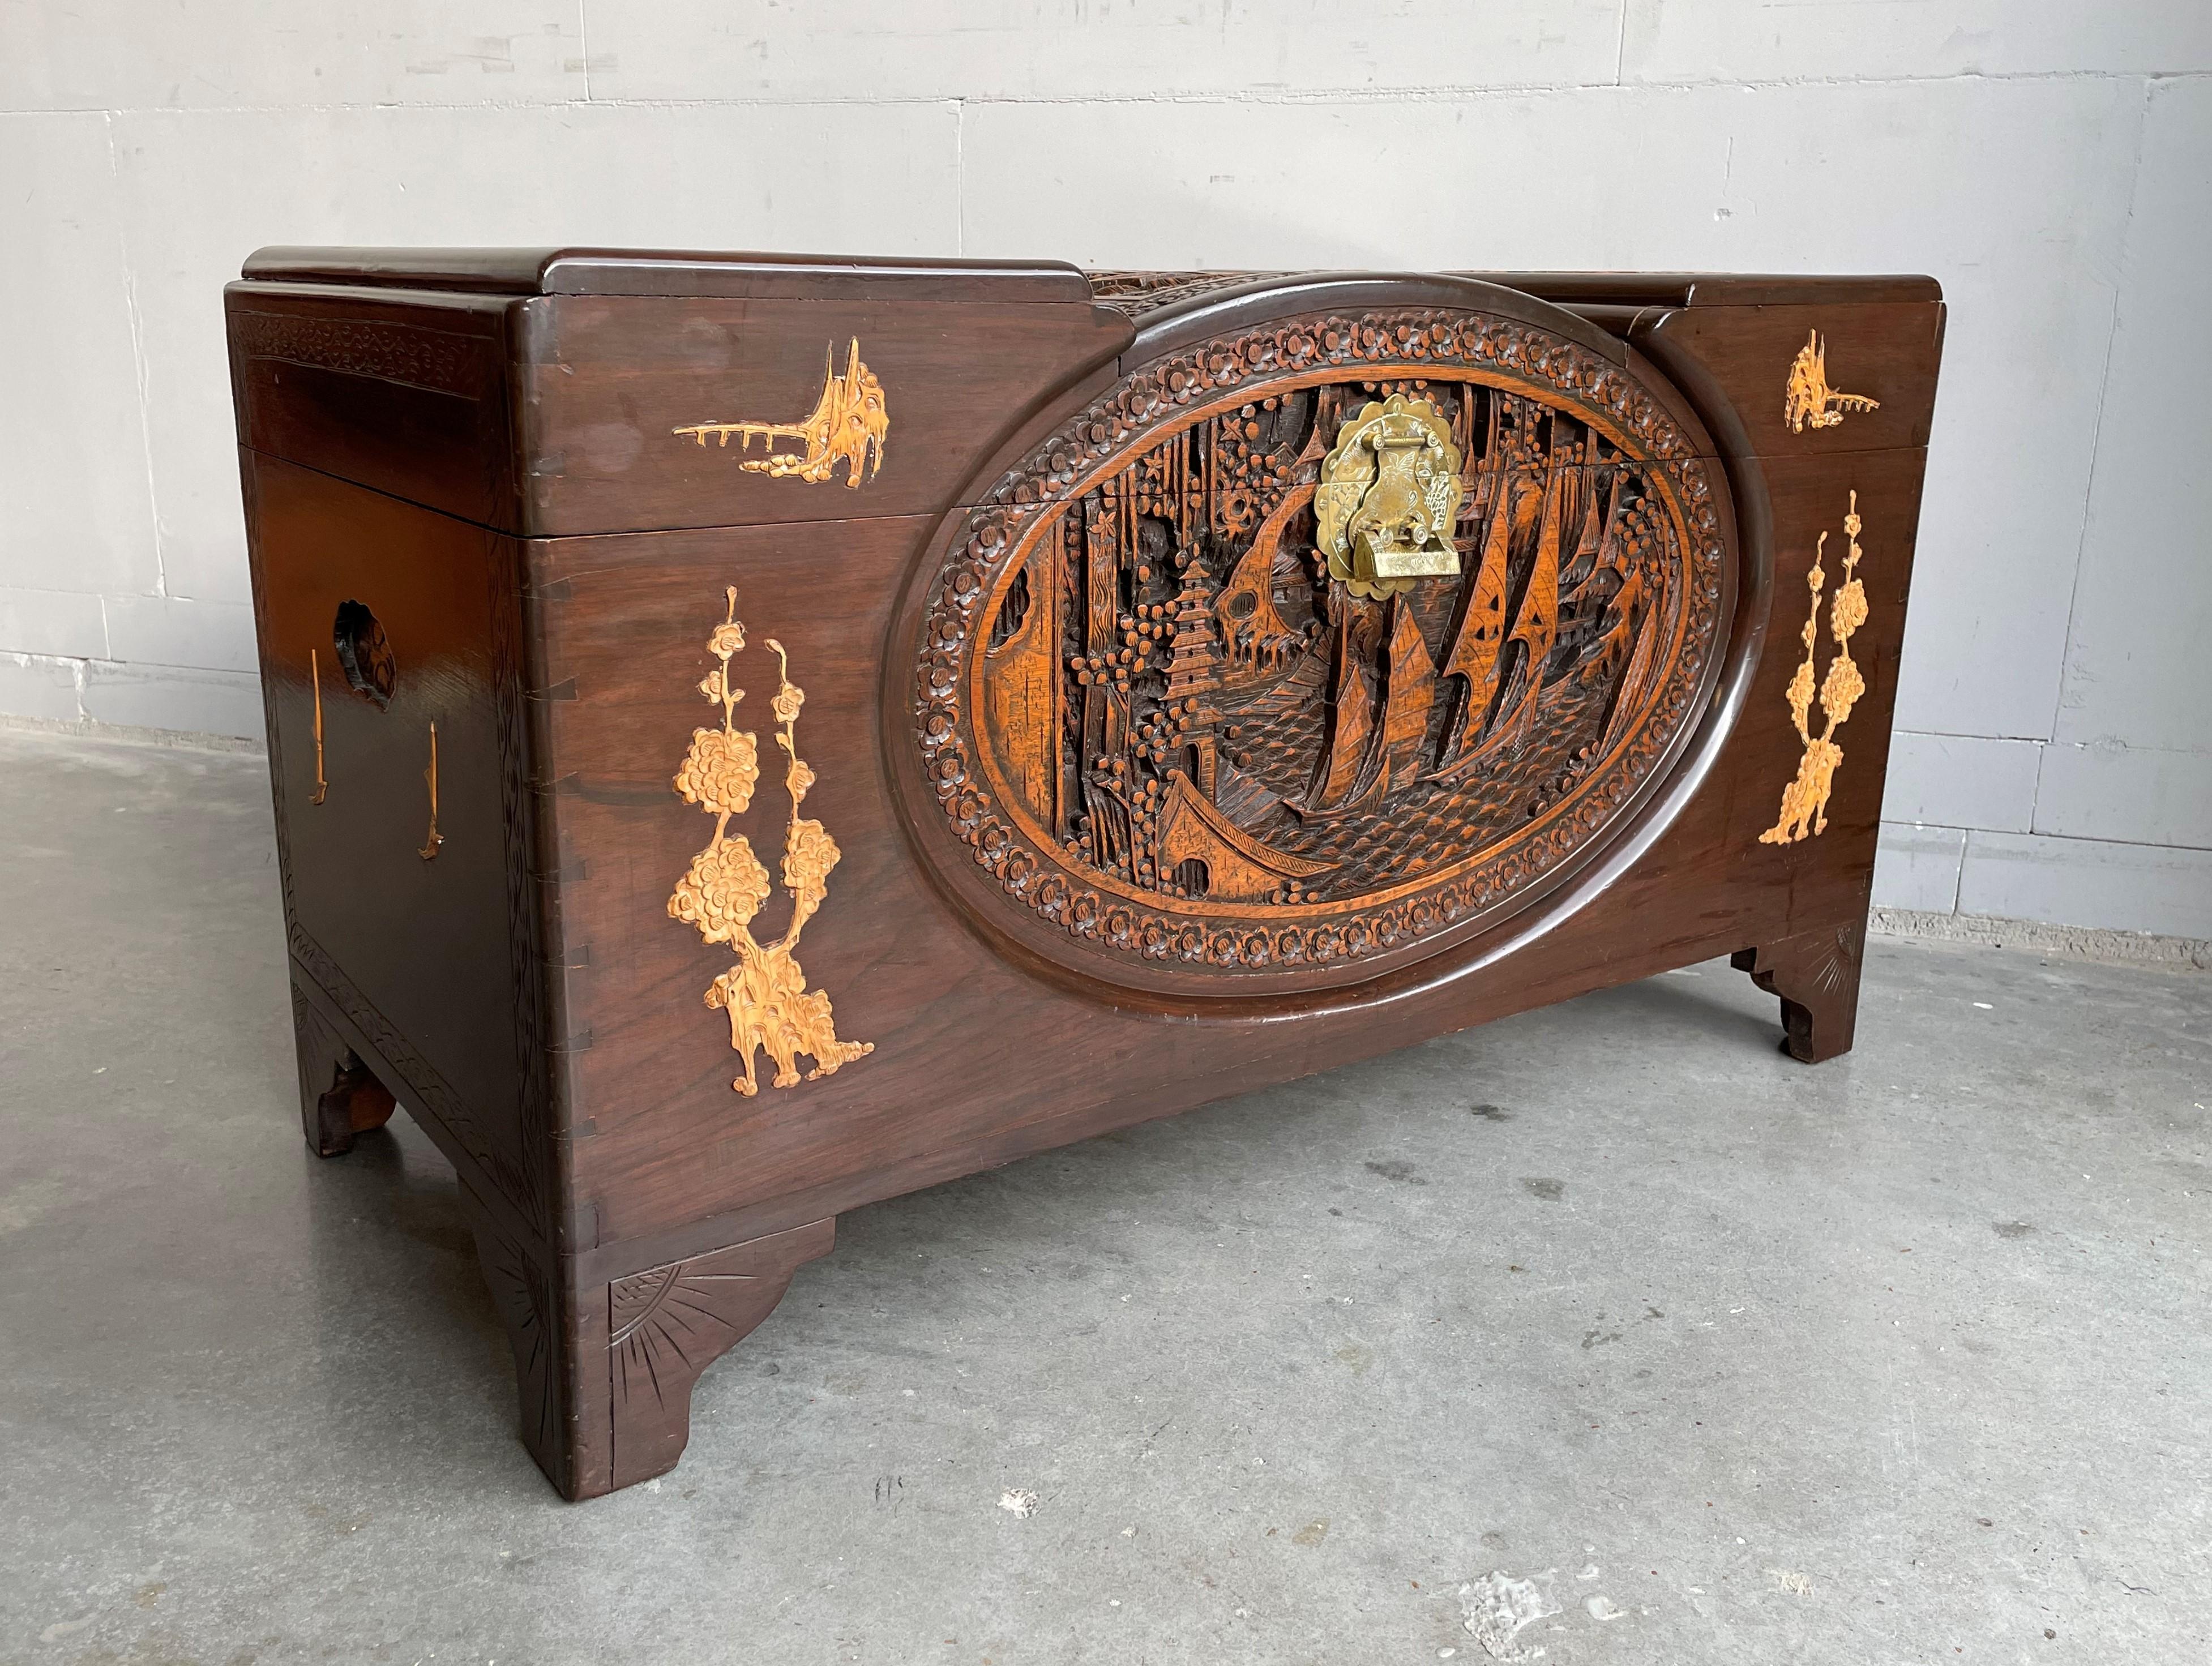 Early 20th century, richly carved Chinese trunk with decorations on all sides.

If you are looking for a decorative and useful piece of furniture with a distinct Asian design then this all handcrafted Chinese 'blanket chest' could be perfect. By the